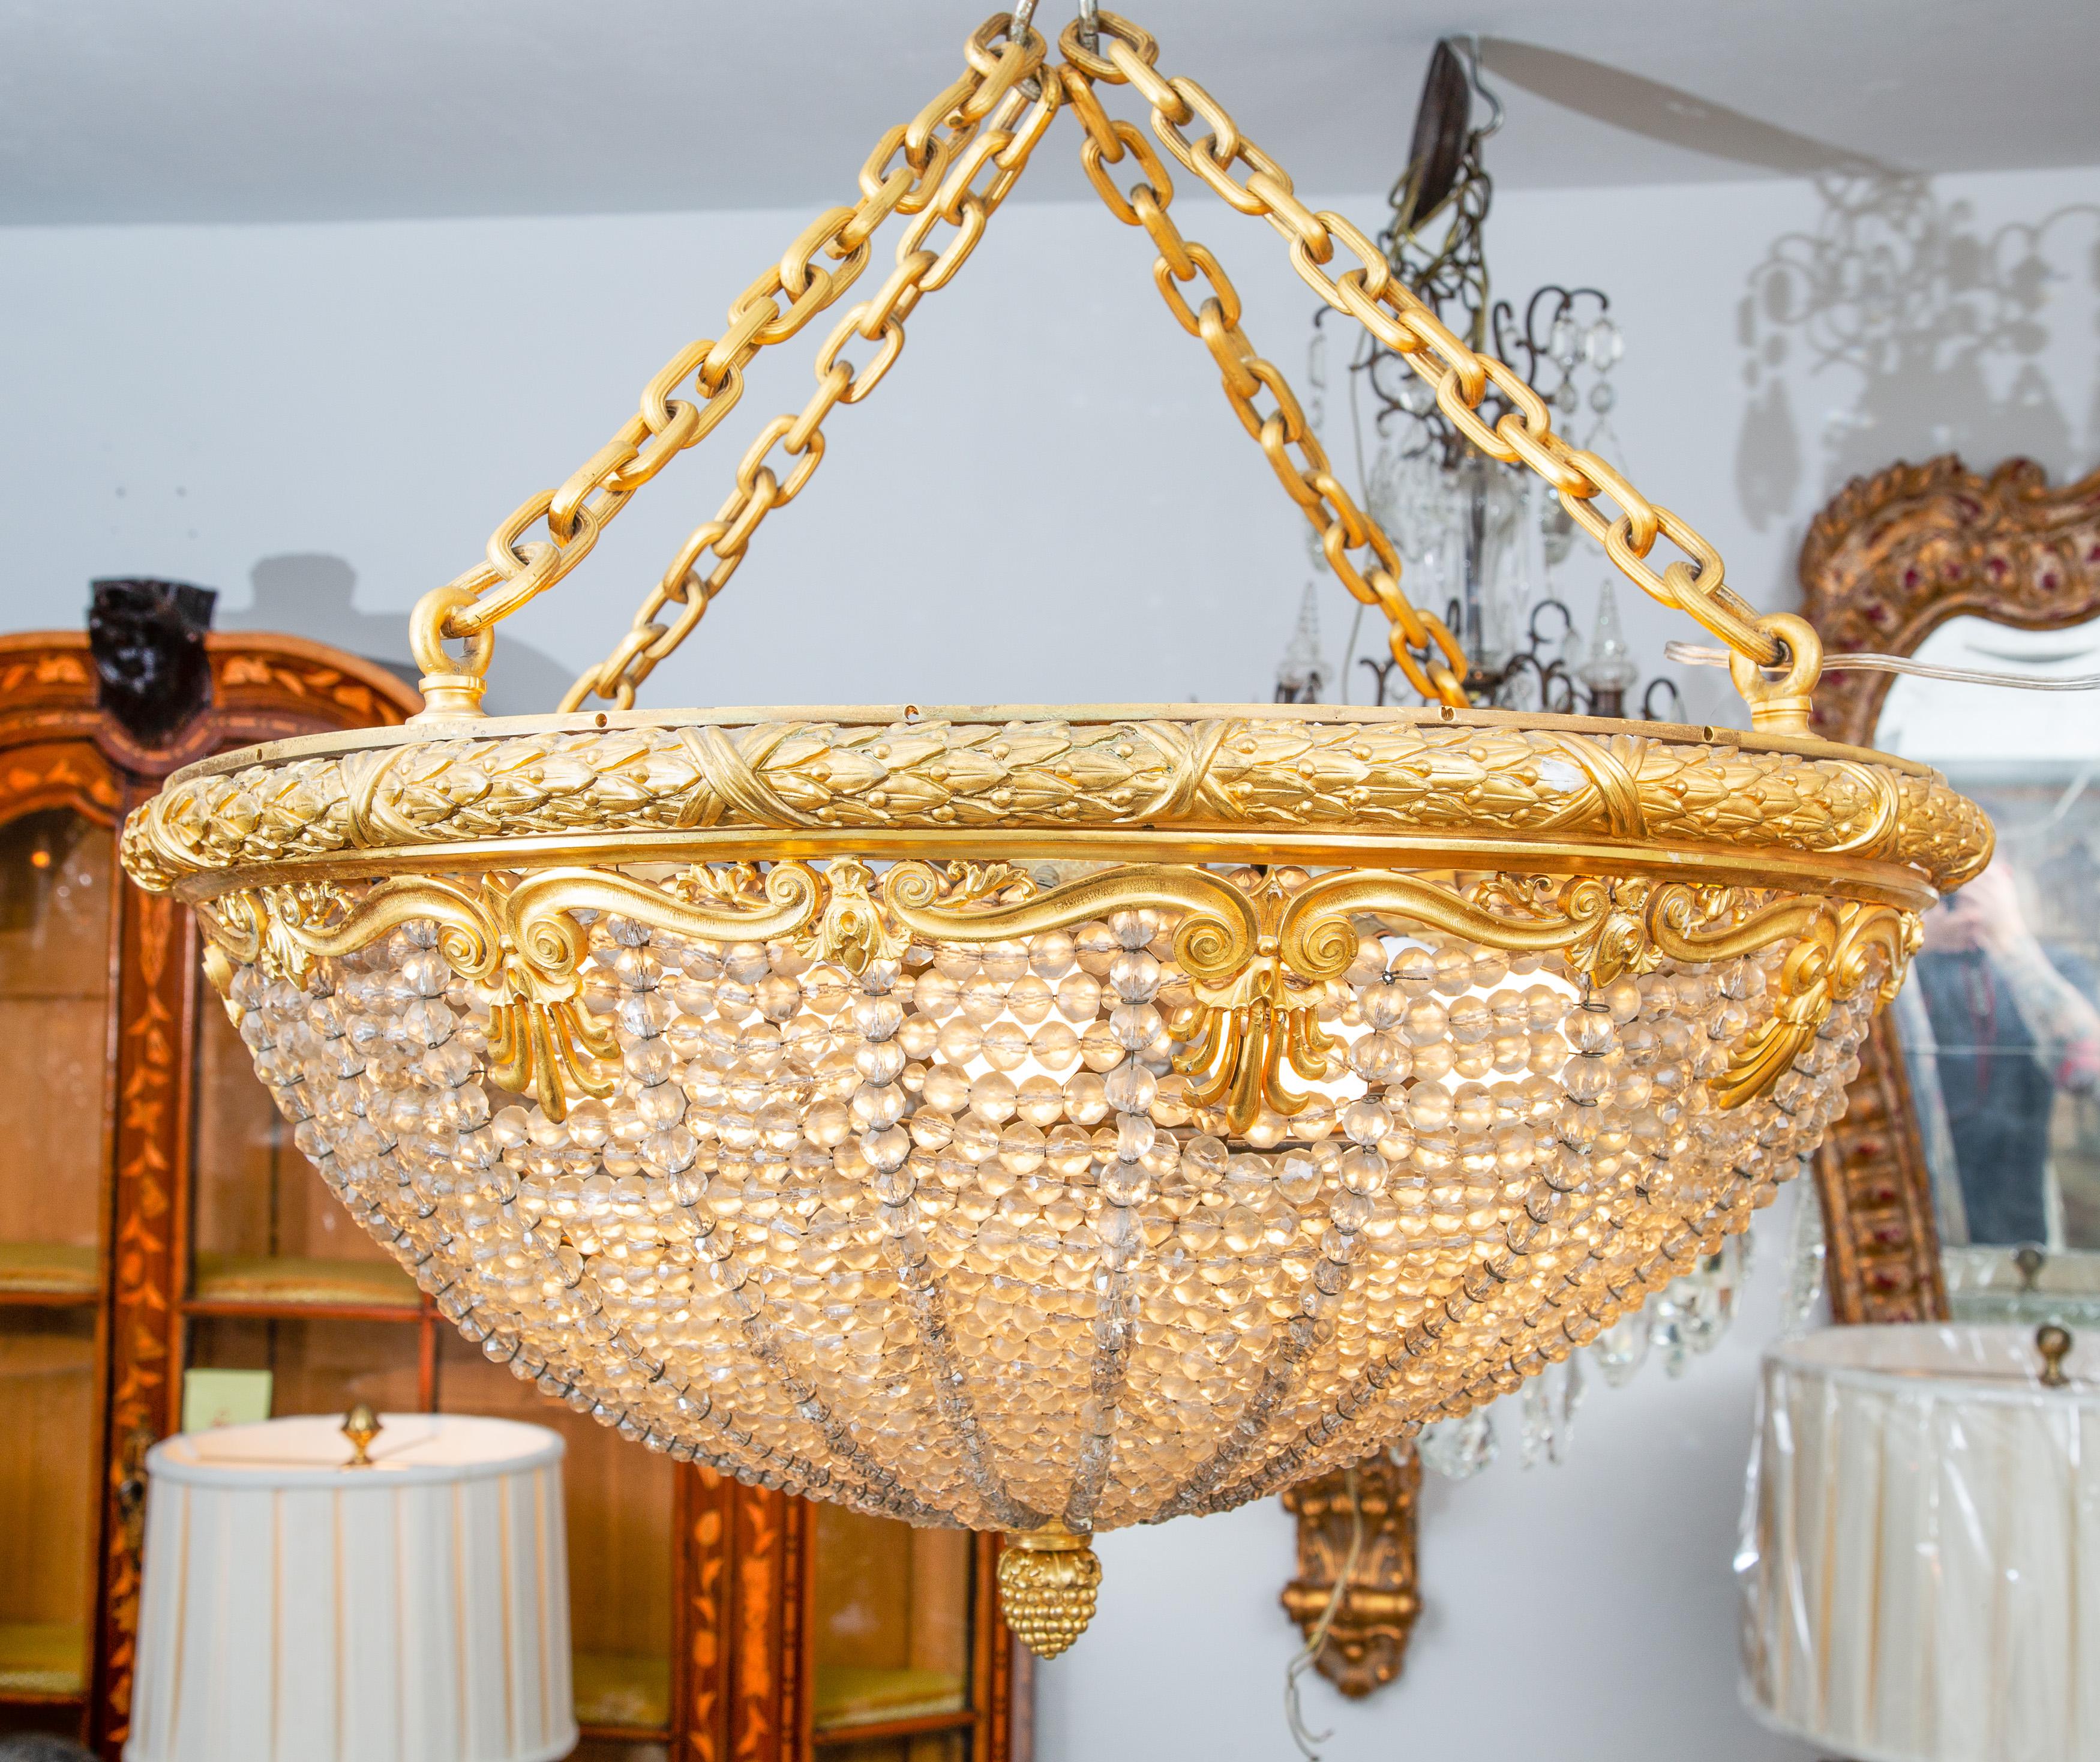 19th Century French Empire Crystal and Gilt Bronze Chandelier For Sale 3